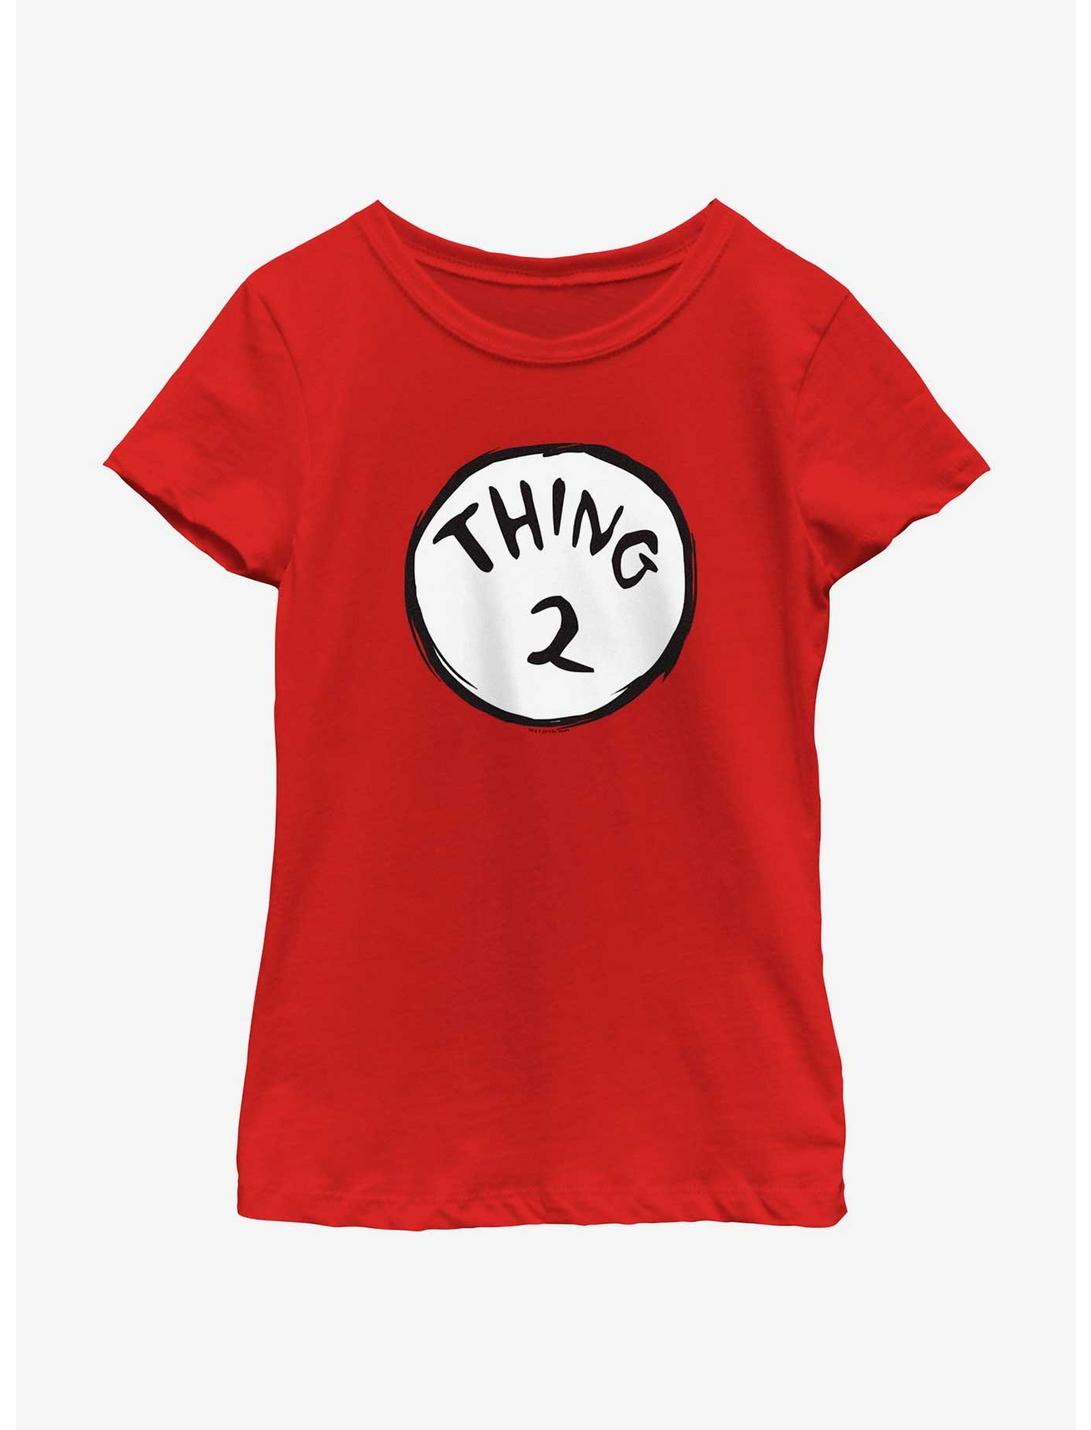 Dr. Seuss's Cat In The Hat Thing 2 Youth Girls T-Shirt, RED, hi-res